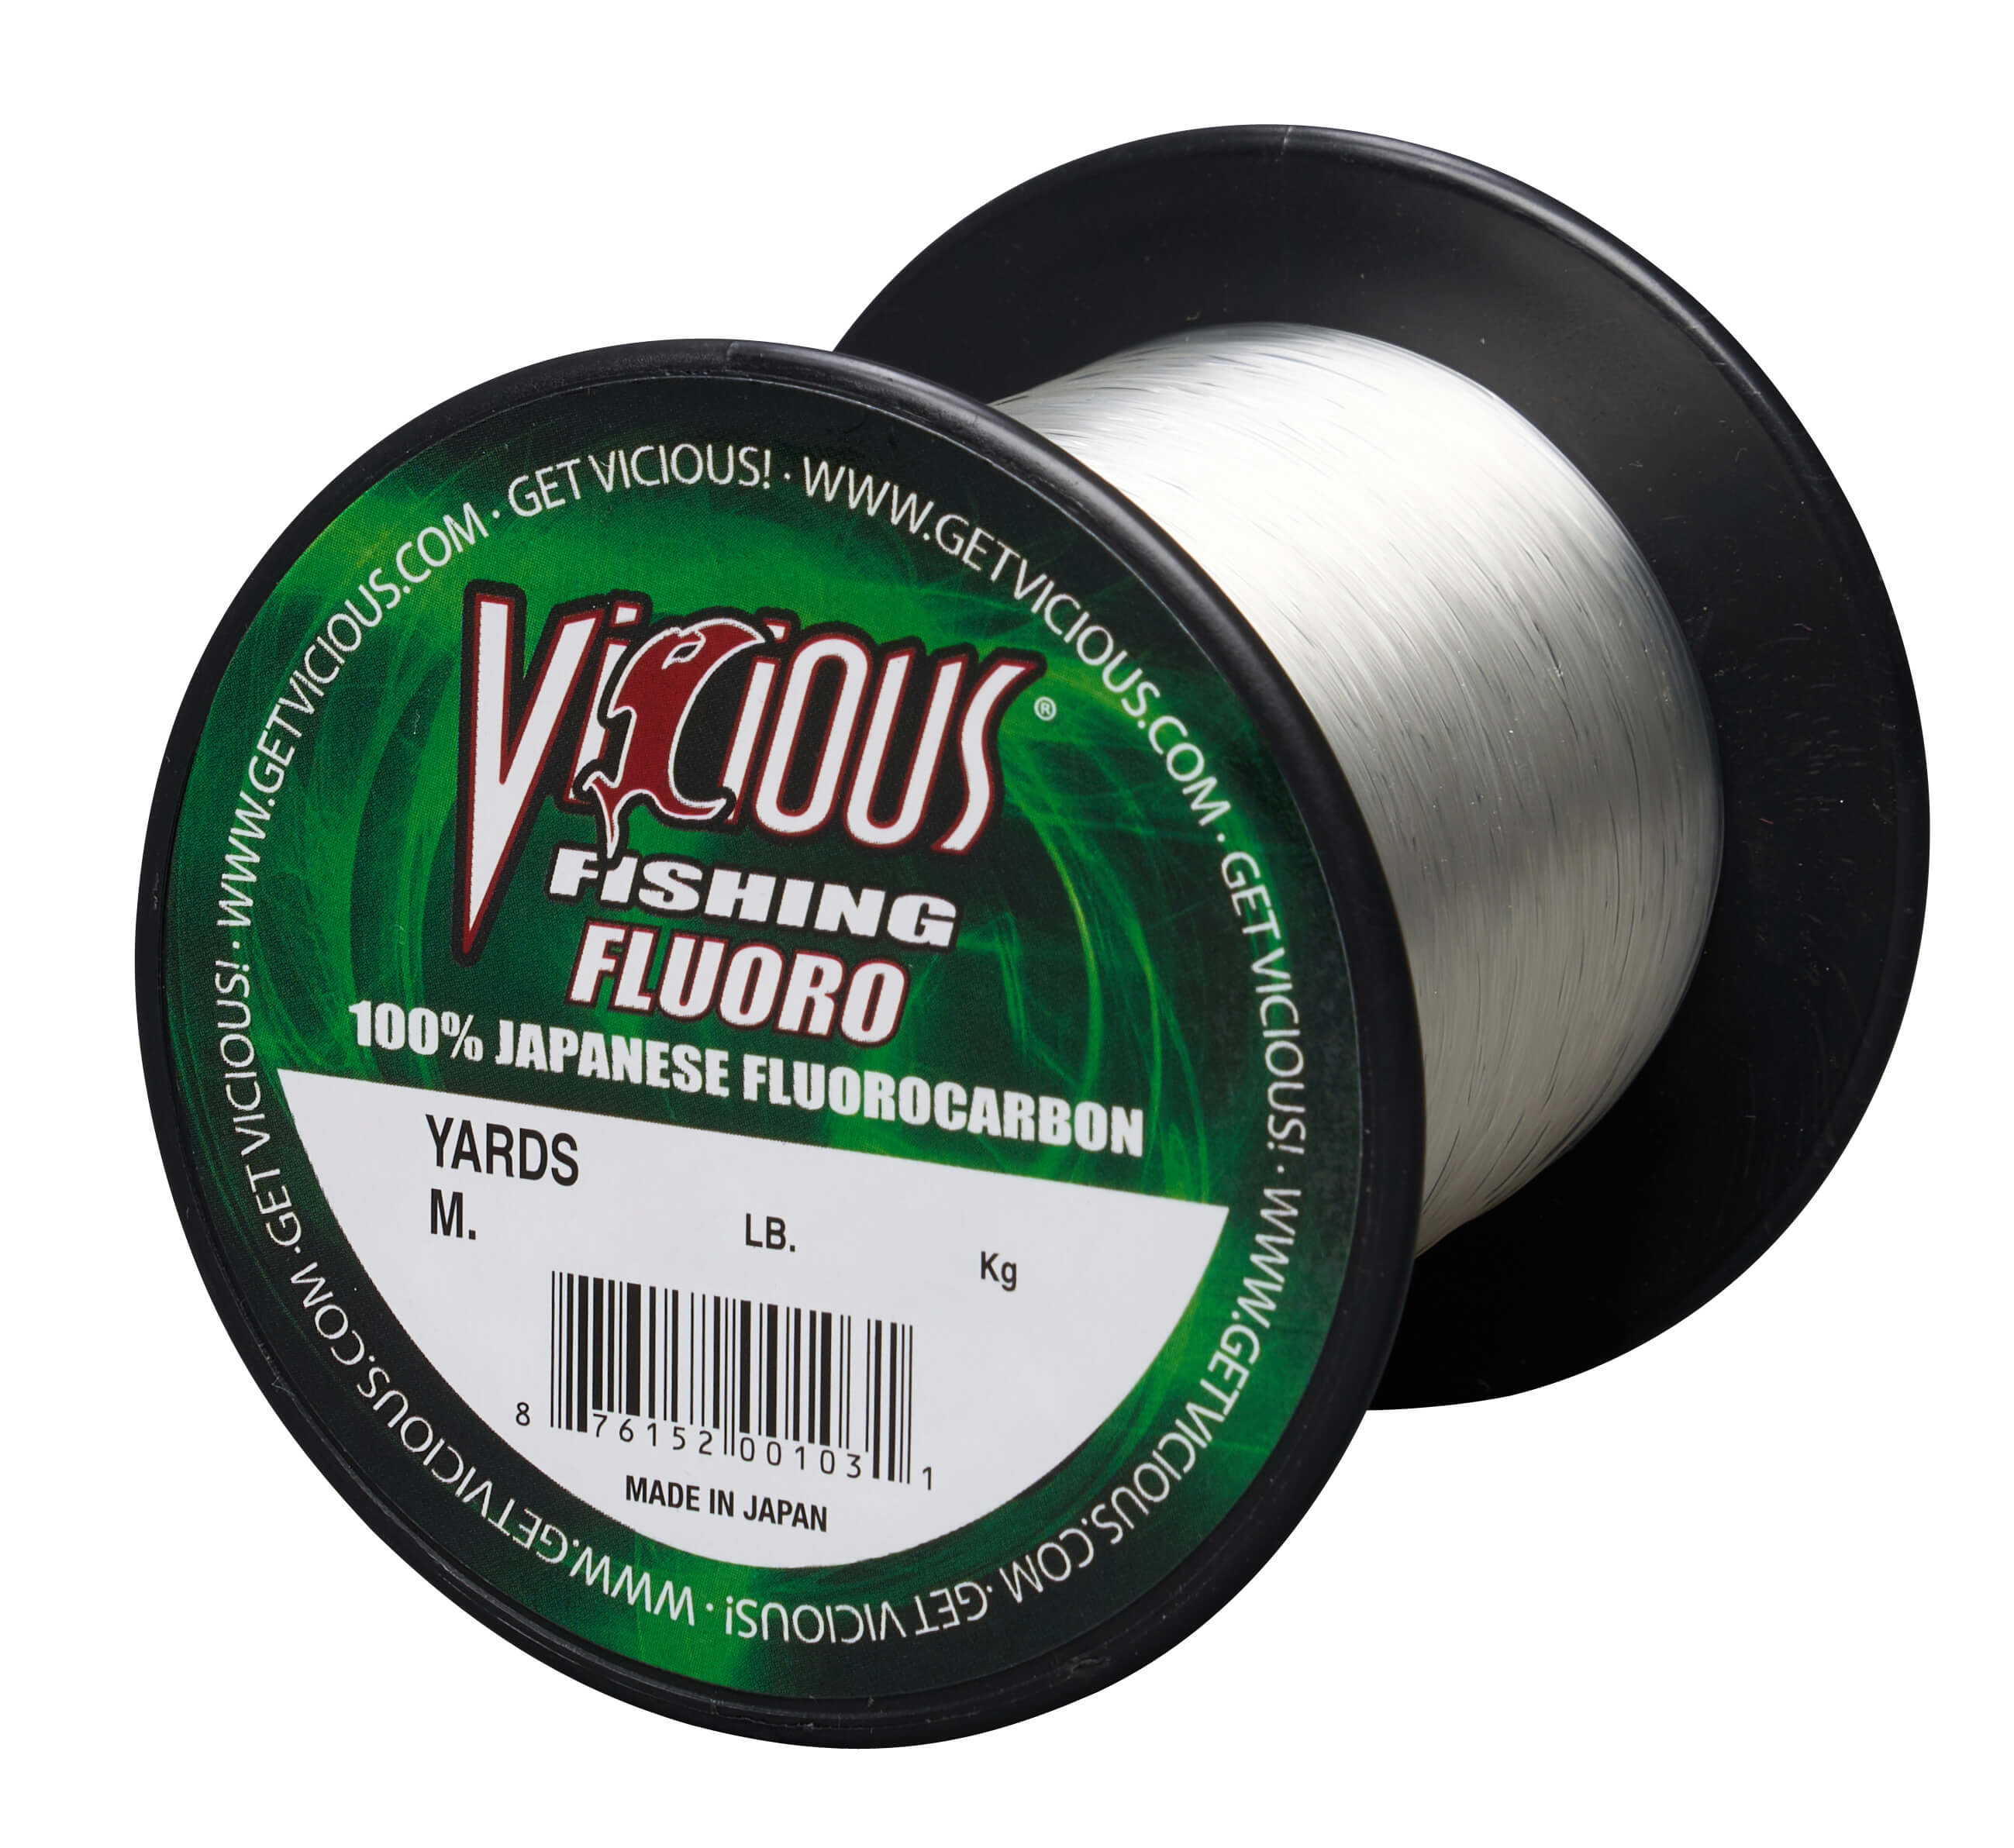 Vicious Fishing 100% Fluorocarbon 500 Yards Clear 15 lb.